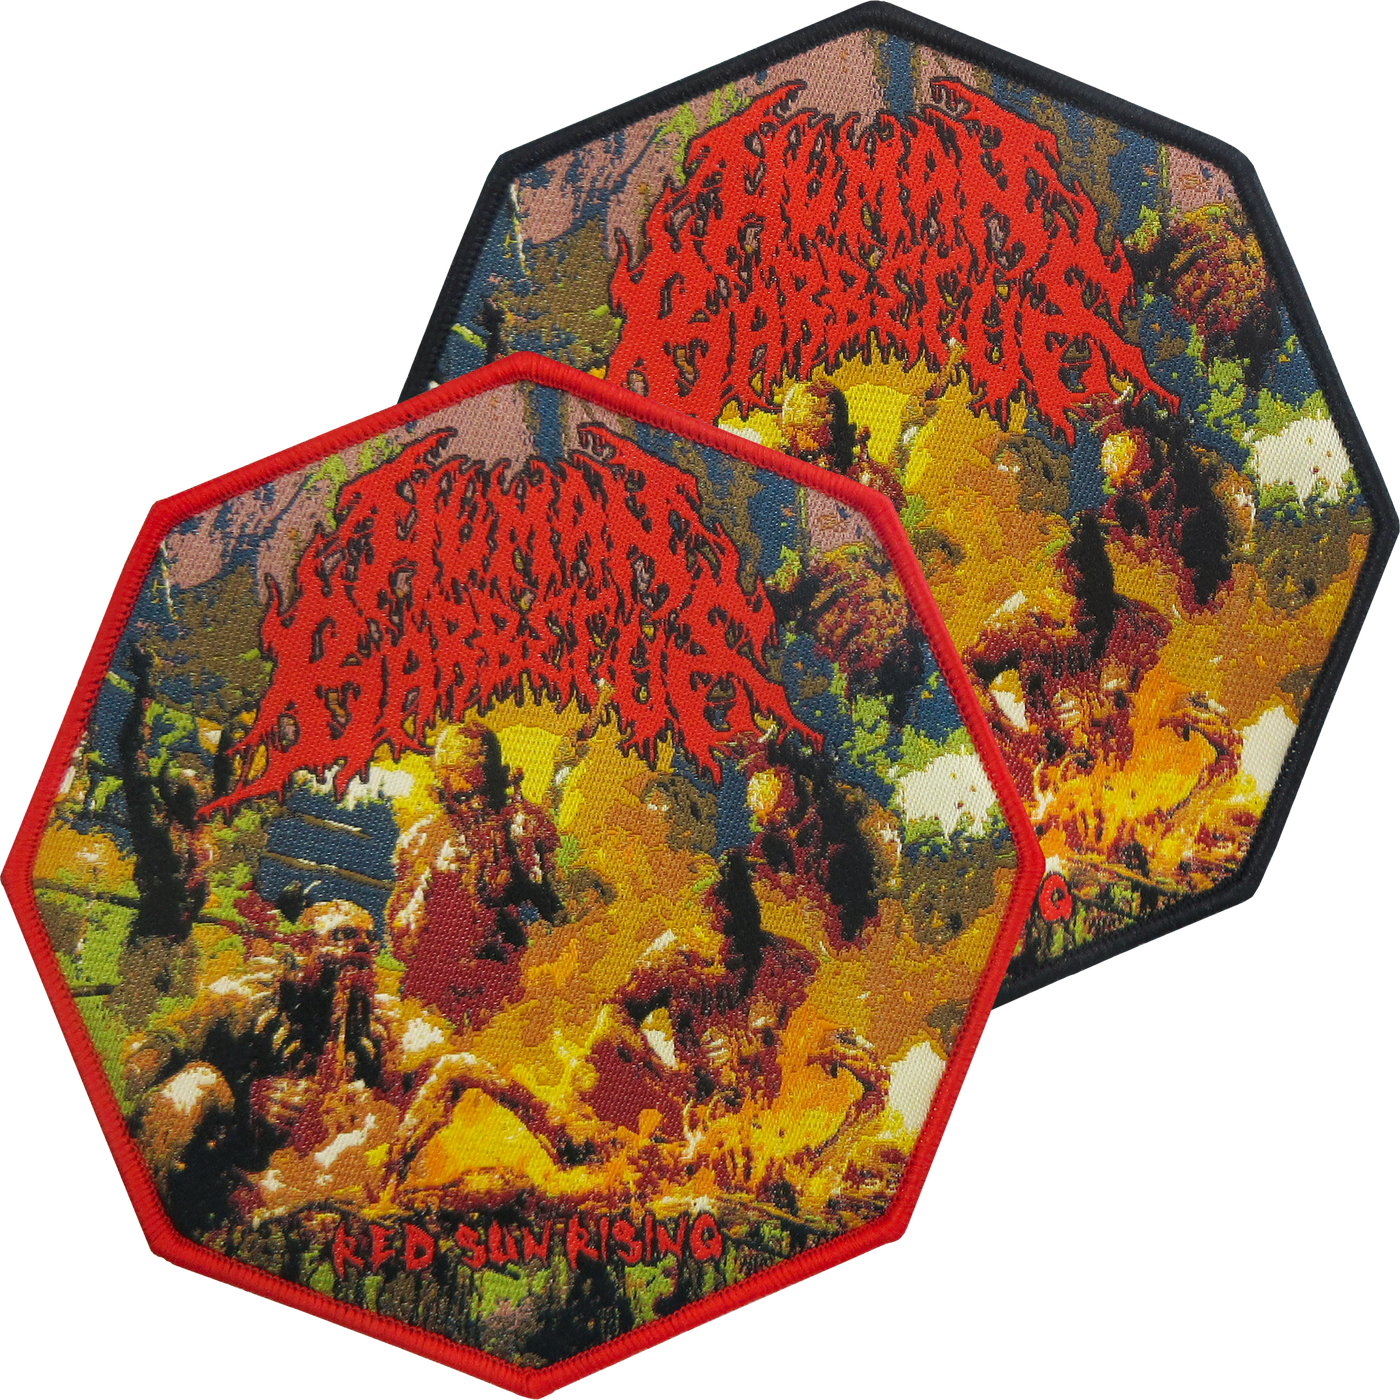 Human Barbecue 'Red Sun Rising' Patch